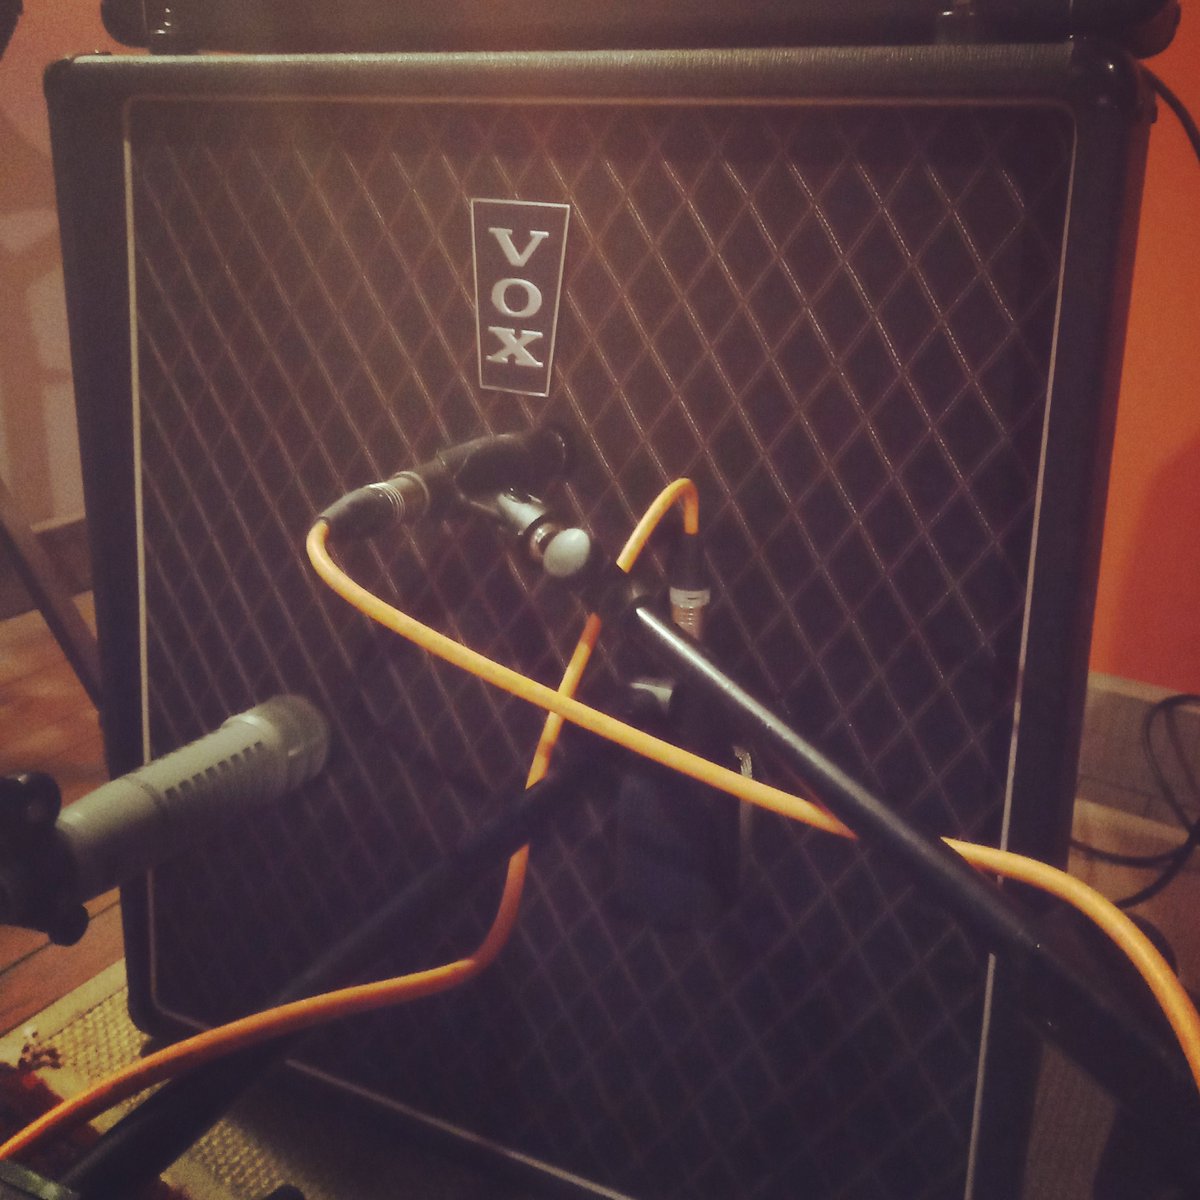 It's #microphonemonday again! Here's my bass setup from Saturday at @voltalab - there's an RE20, an SM57 & a D12
.
#studiolife #gearporn #microphones #recording #microphonemonday